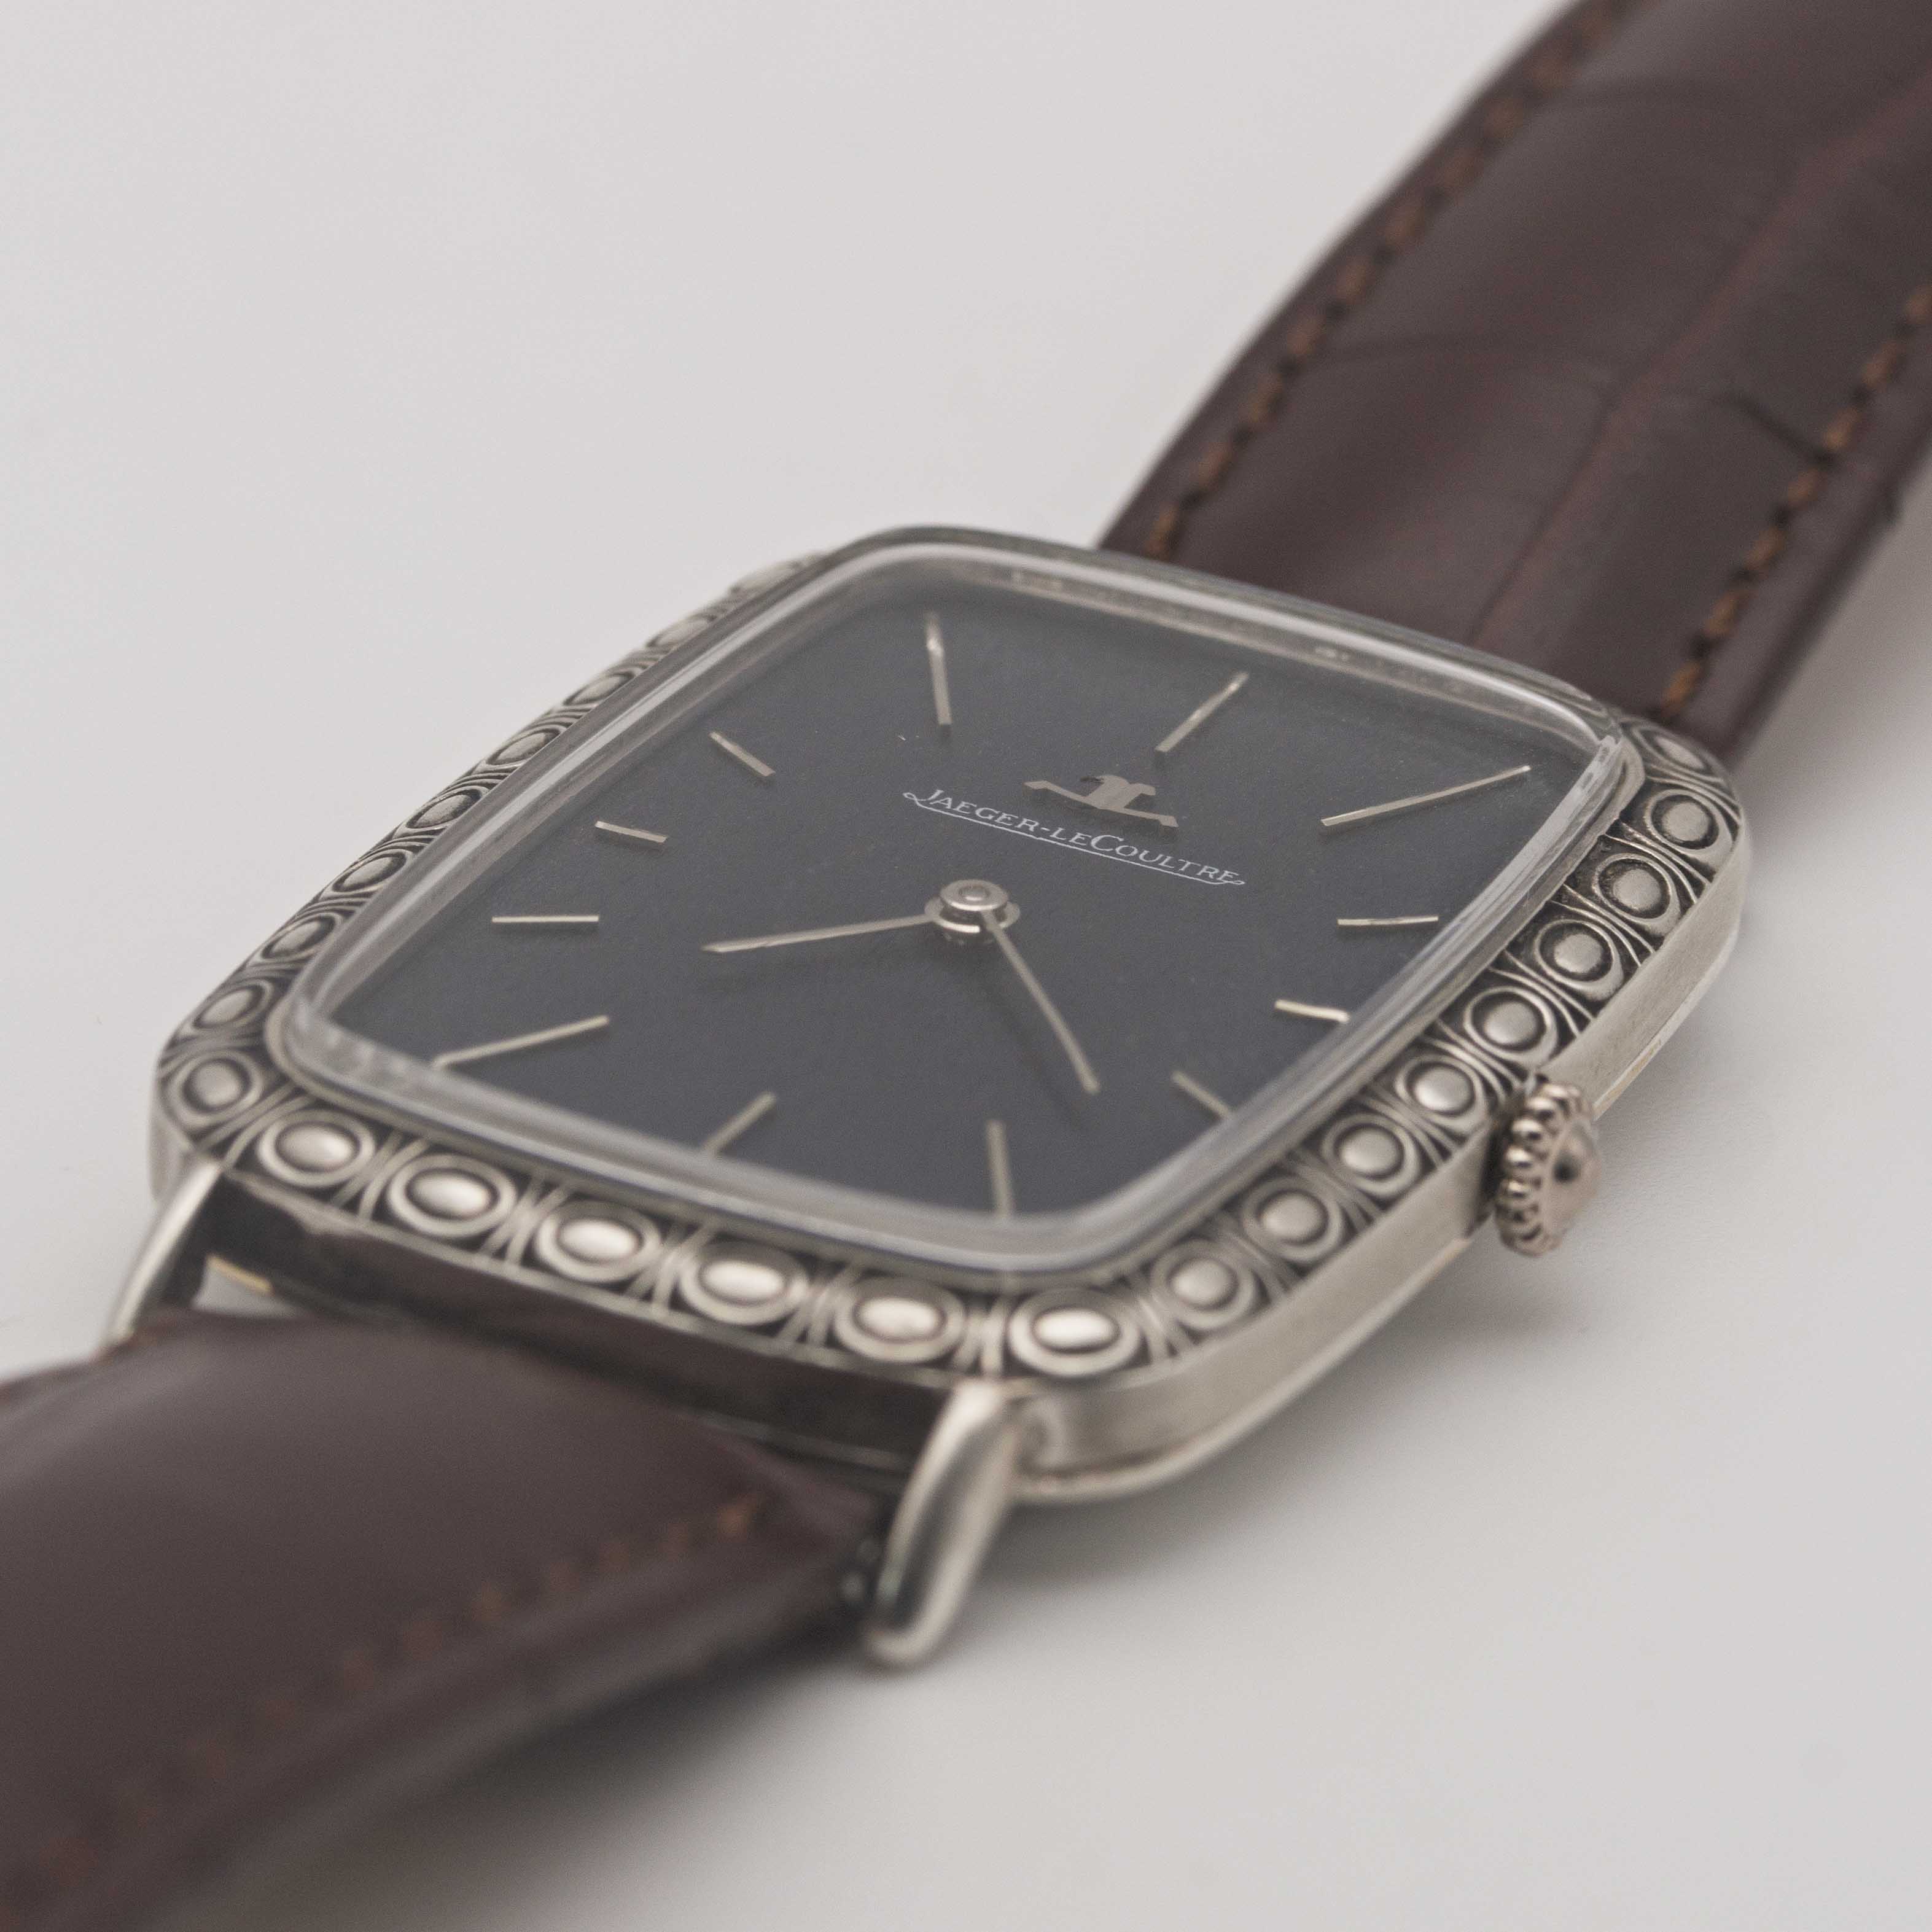 A GENTLEMAN'S SIZE SOLID SILVER JAEGER LECOULTRE RECTANGULAR WRIST WATCH CIRCA 1970s, REF. 9037 WITH - Image 3 of 10